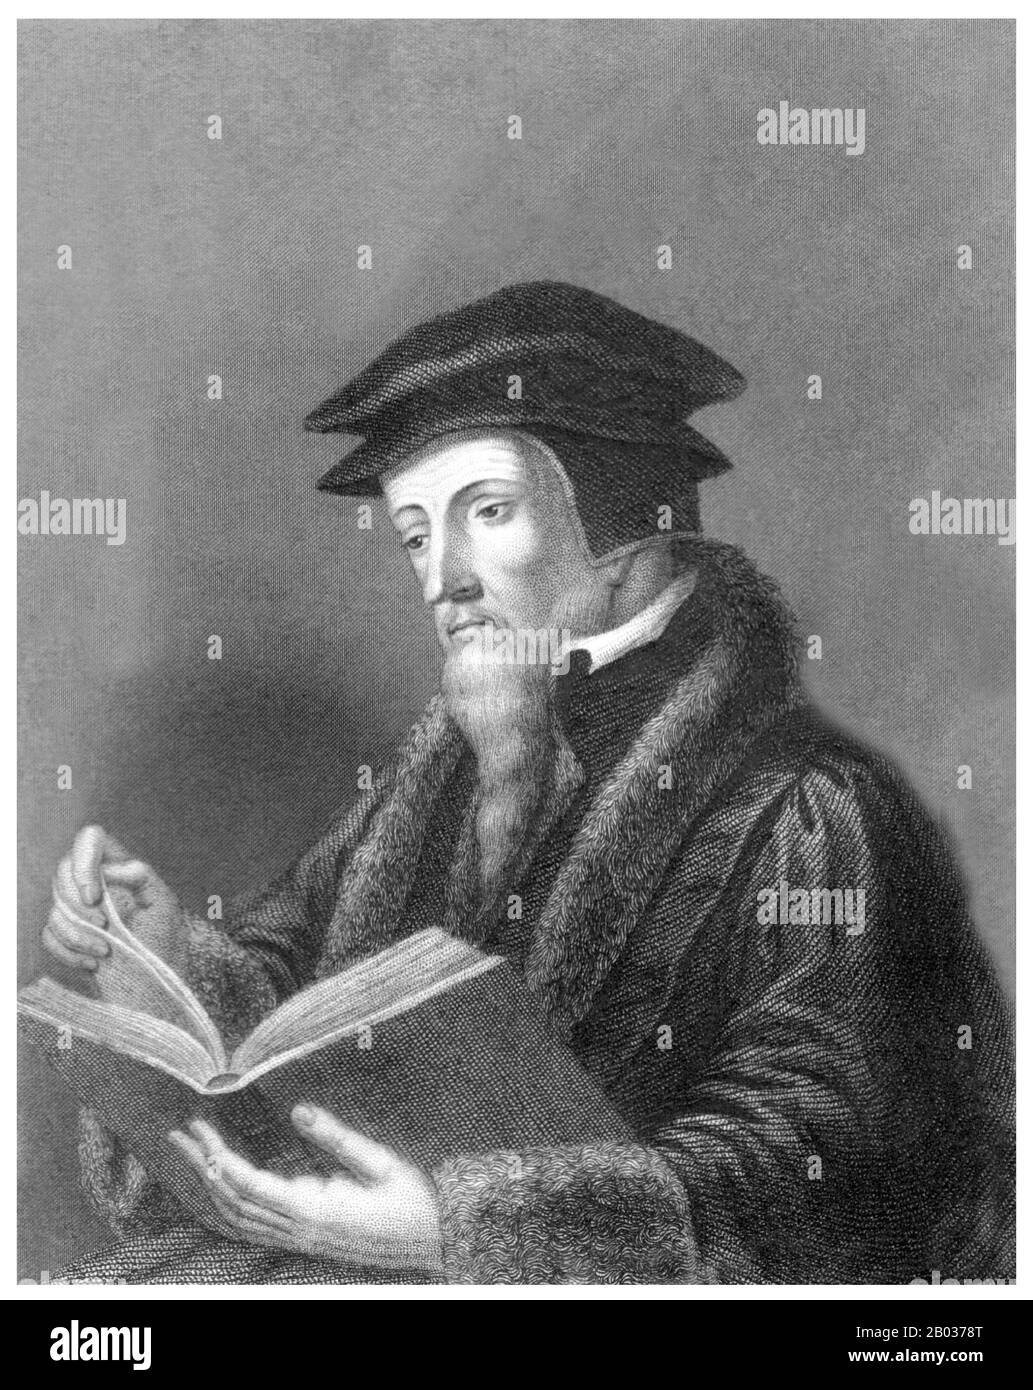 John Calvin, born Jehan Cauvin: 10 July 1509 – 27 May 1564) was an influential French theologian and pastor during the Protestant Reformation. He was a principal figure in the development of the system of Christian theology later called Calvinism, aspects of which include the doctrines of predestination and of the absolute sovereignty of God in salvation of the human soul from death and eternal damnation.  Various Congregational, Reformed, and Presbyterian churches, which look to Calvin as the chief expositor of their beliefs, have spread throughout the world. Stock Photo